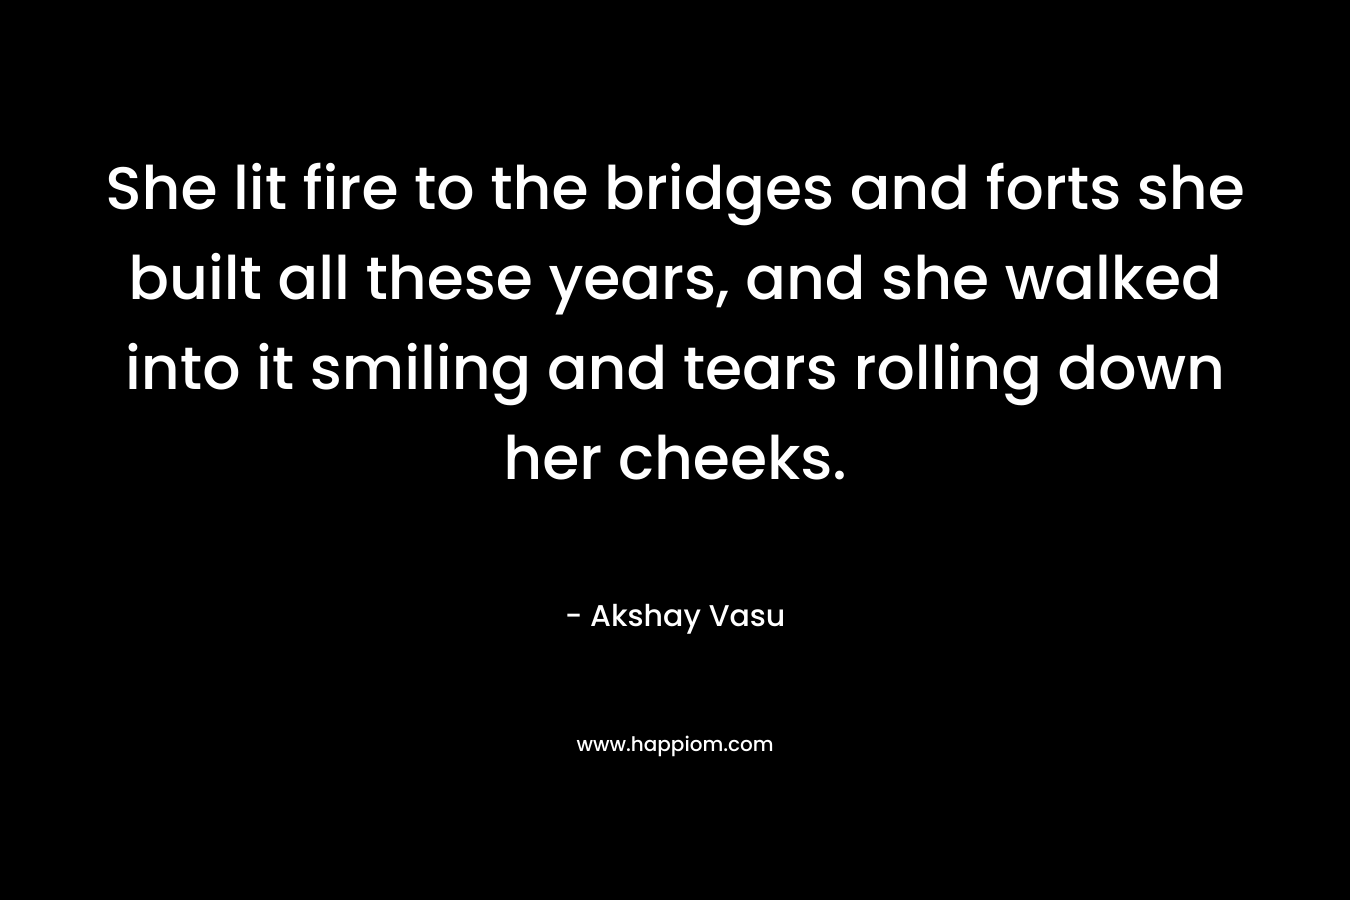 She lit fire to the bridges and forts she built all these years, and she walked into it smiling and tears rolling down her cheeks. – Akshay Vasu